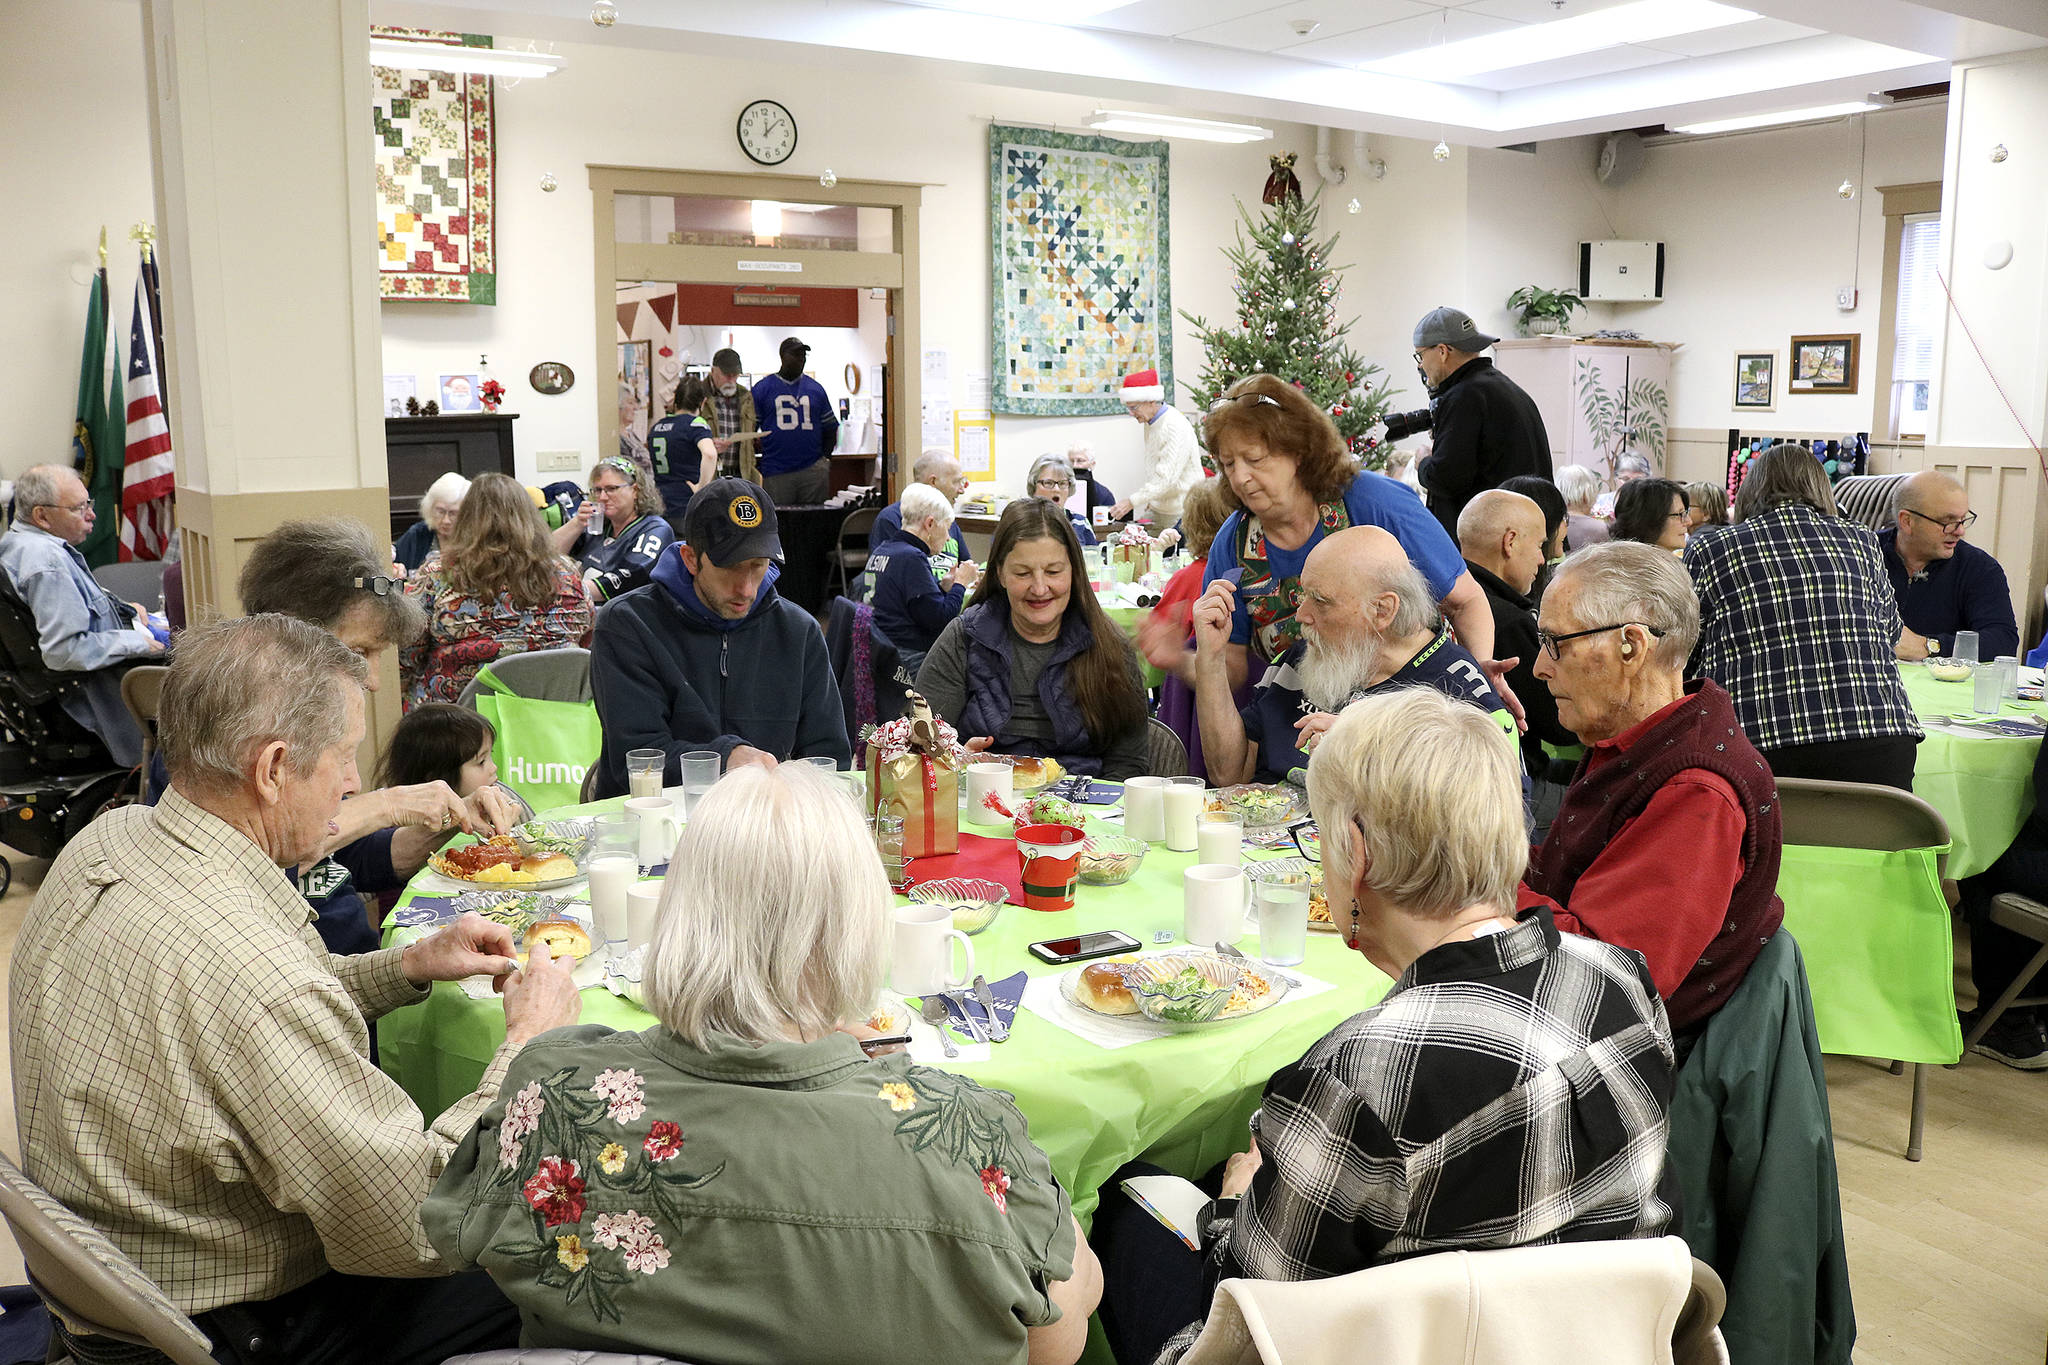 The Sno-Valley Senior Center in Carnation served lunch for the 12 Days of Goodness program on Dec. 13. Stephanie Quiroz/staff photo